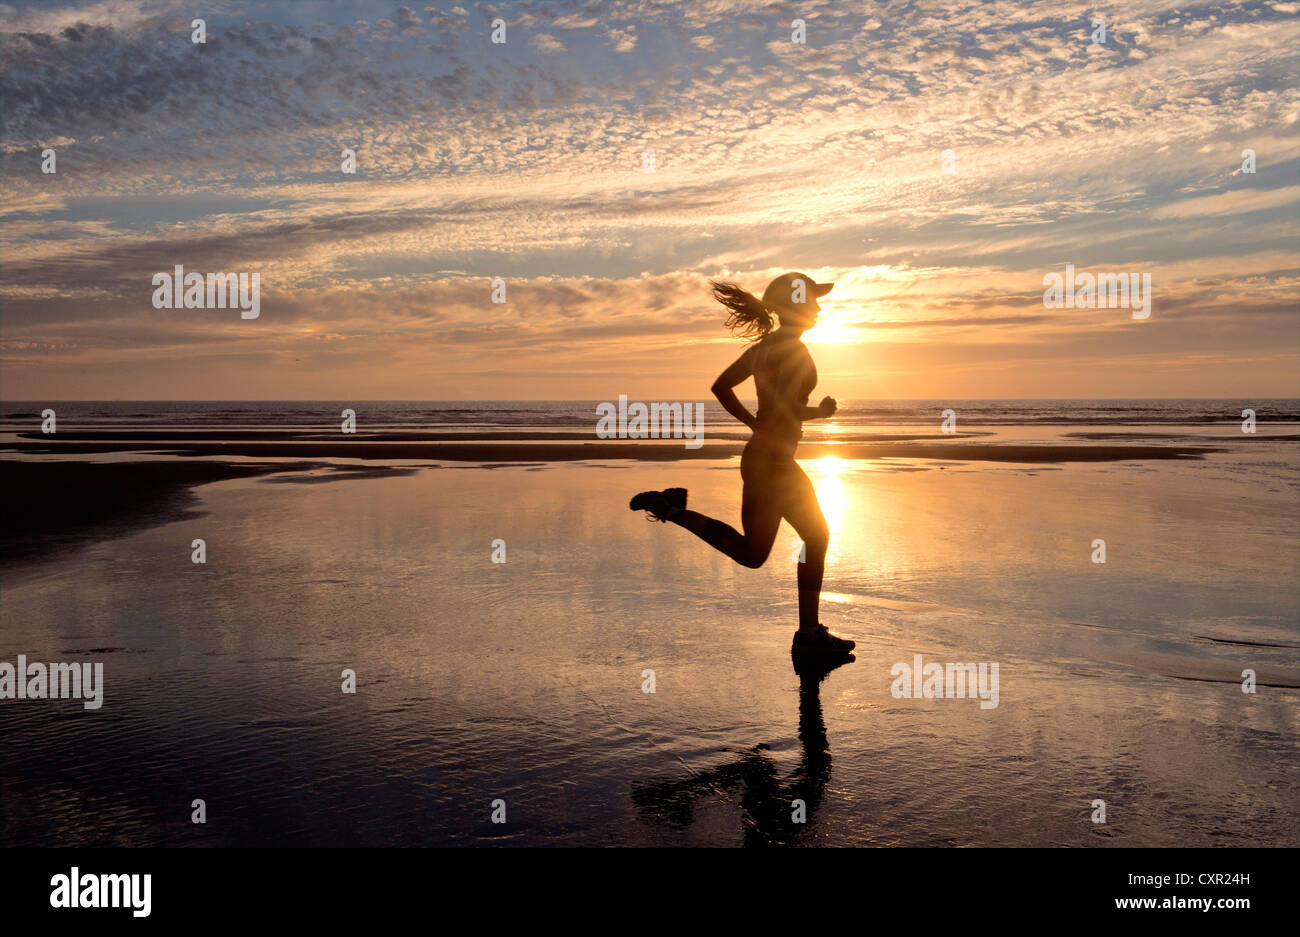 Woman running on beach at sunrise Banque D'Images